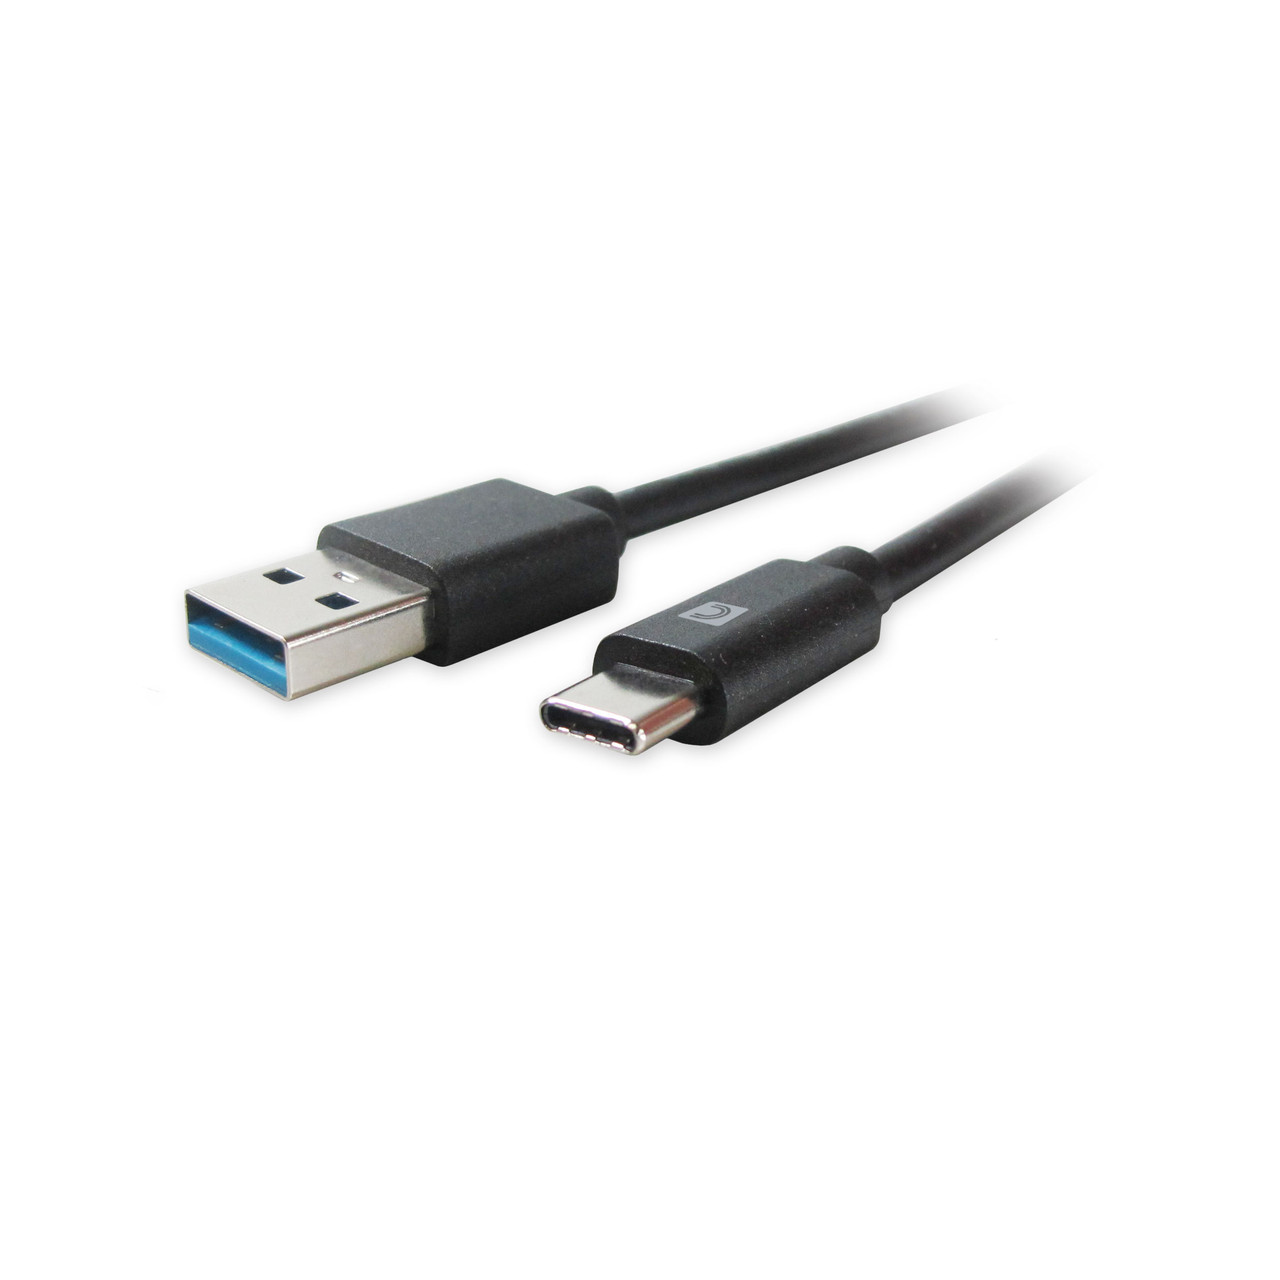 varkensvlees Academie Lunch USB Type-C Male to USB Type-A Male Cable 10ft.